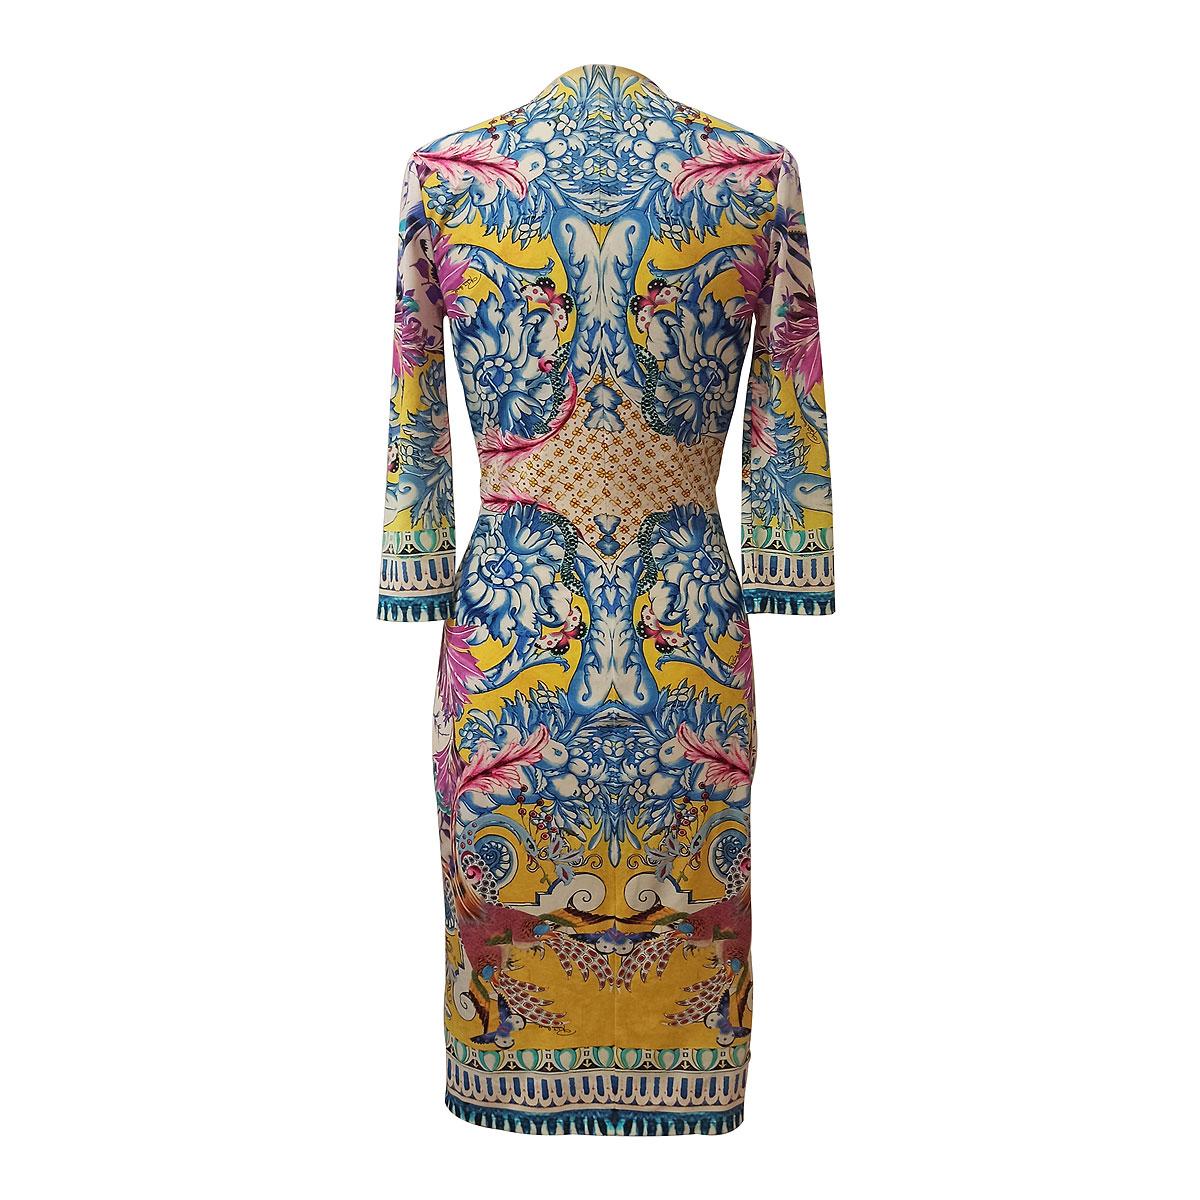 Beautiful Roberto Cavalli dress
Fabric and size tags removed
Elastic fabric
Multicolor fancy
3/4 sleeves
V neck
Golden metal application
Total length cm 105 (41,33 inches) 
Shoulders cm 34 (13,38 inches)
Worldwide express shipping included in the